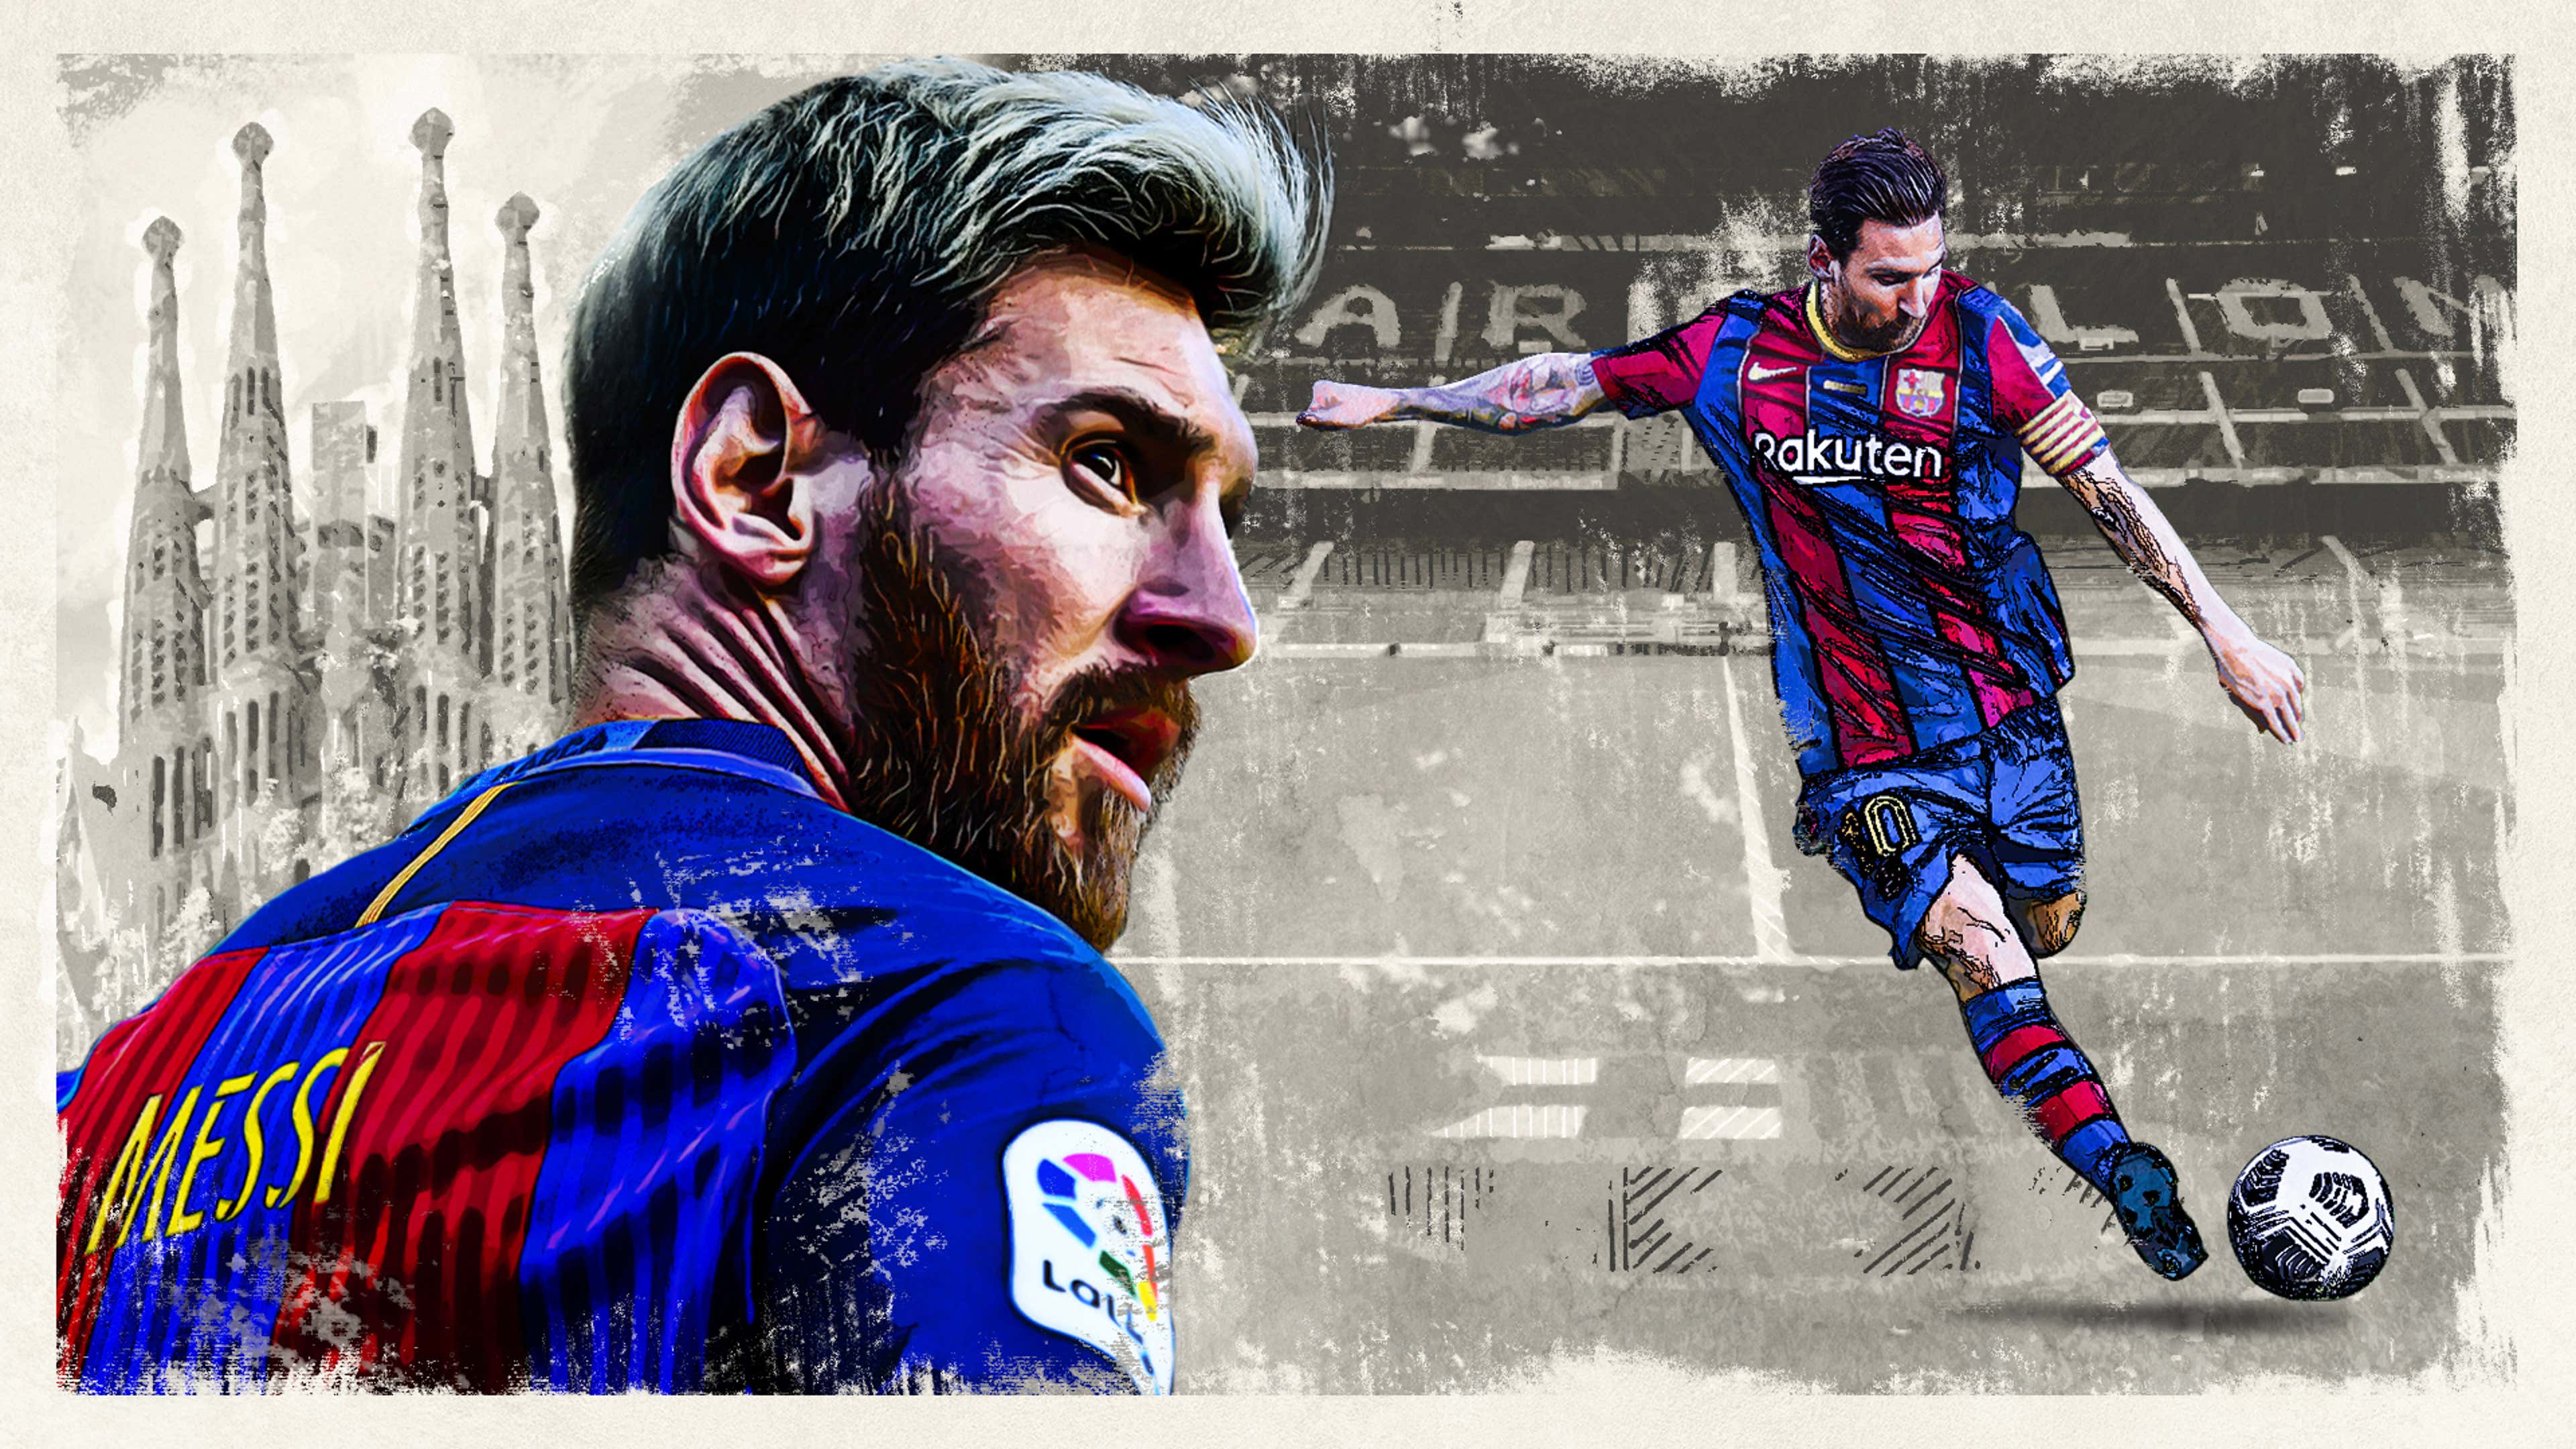 Leo Messi and CR7 wallpaper for you all - Leo Legend Messi